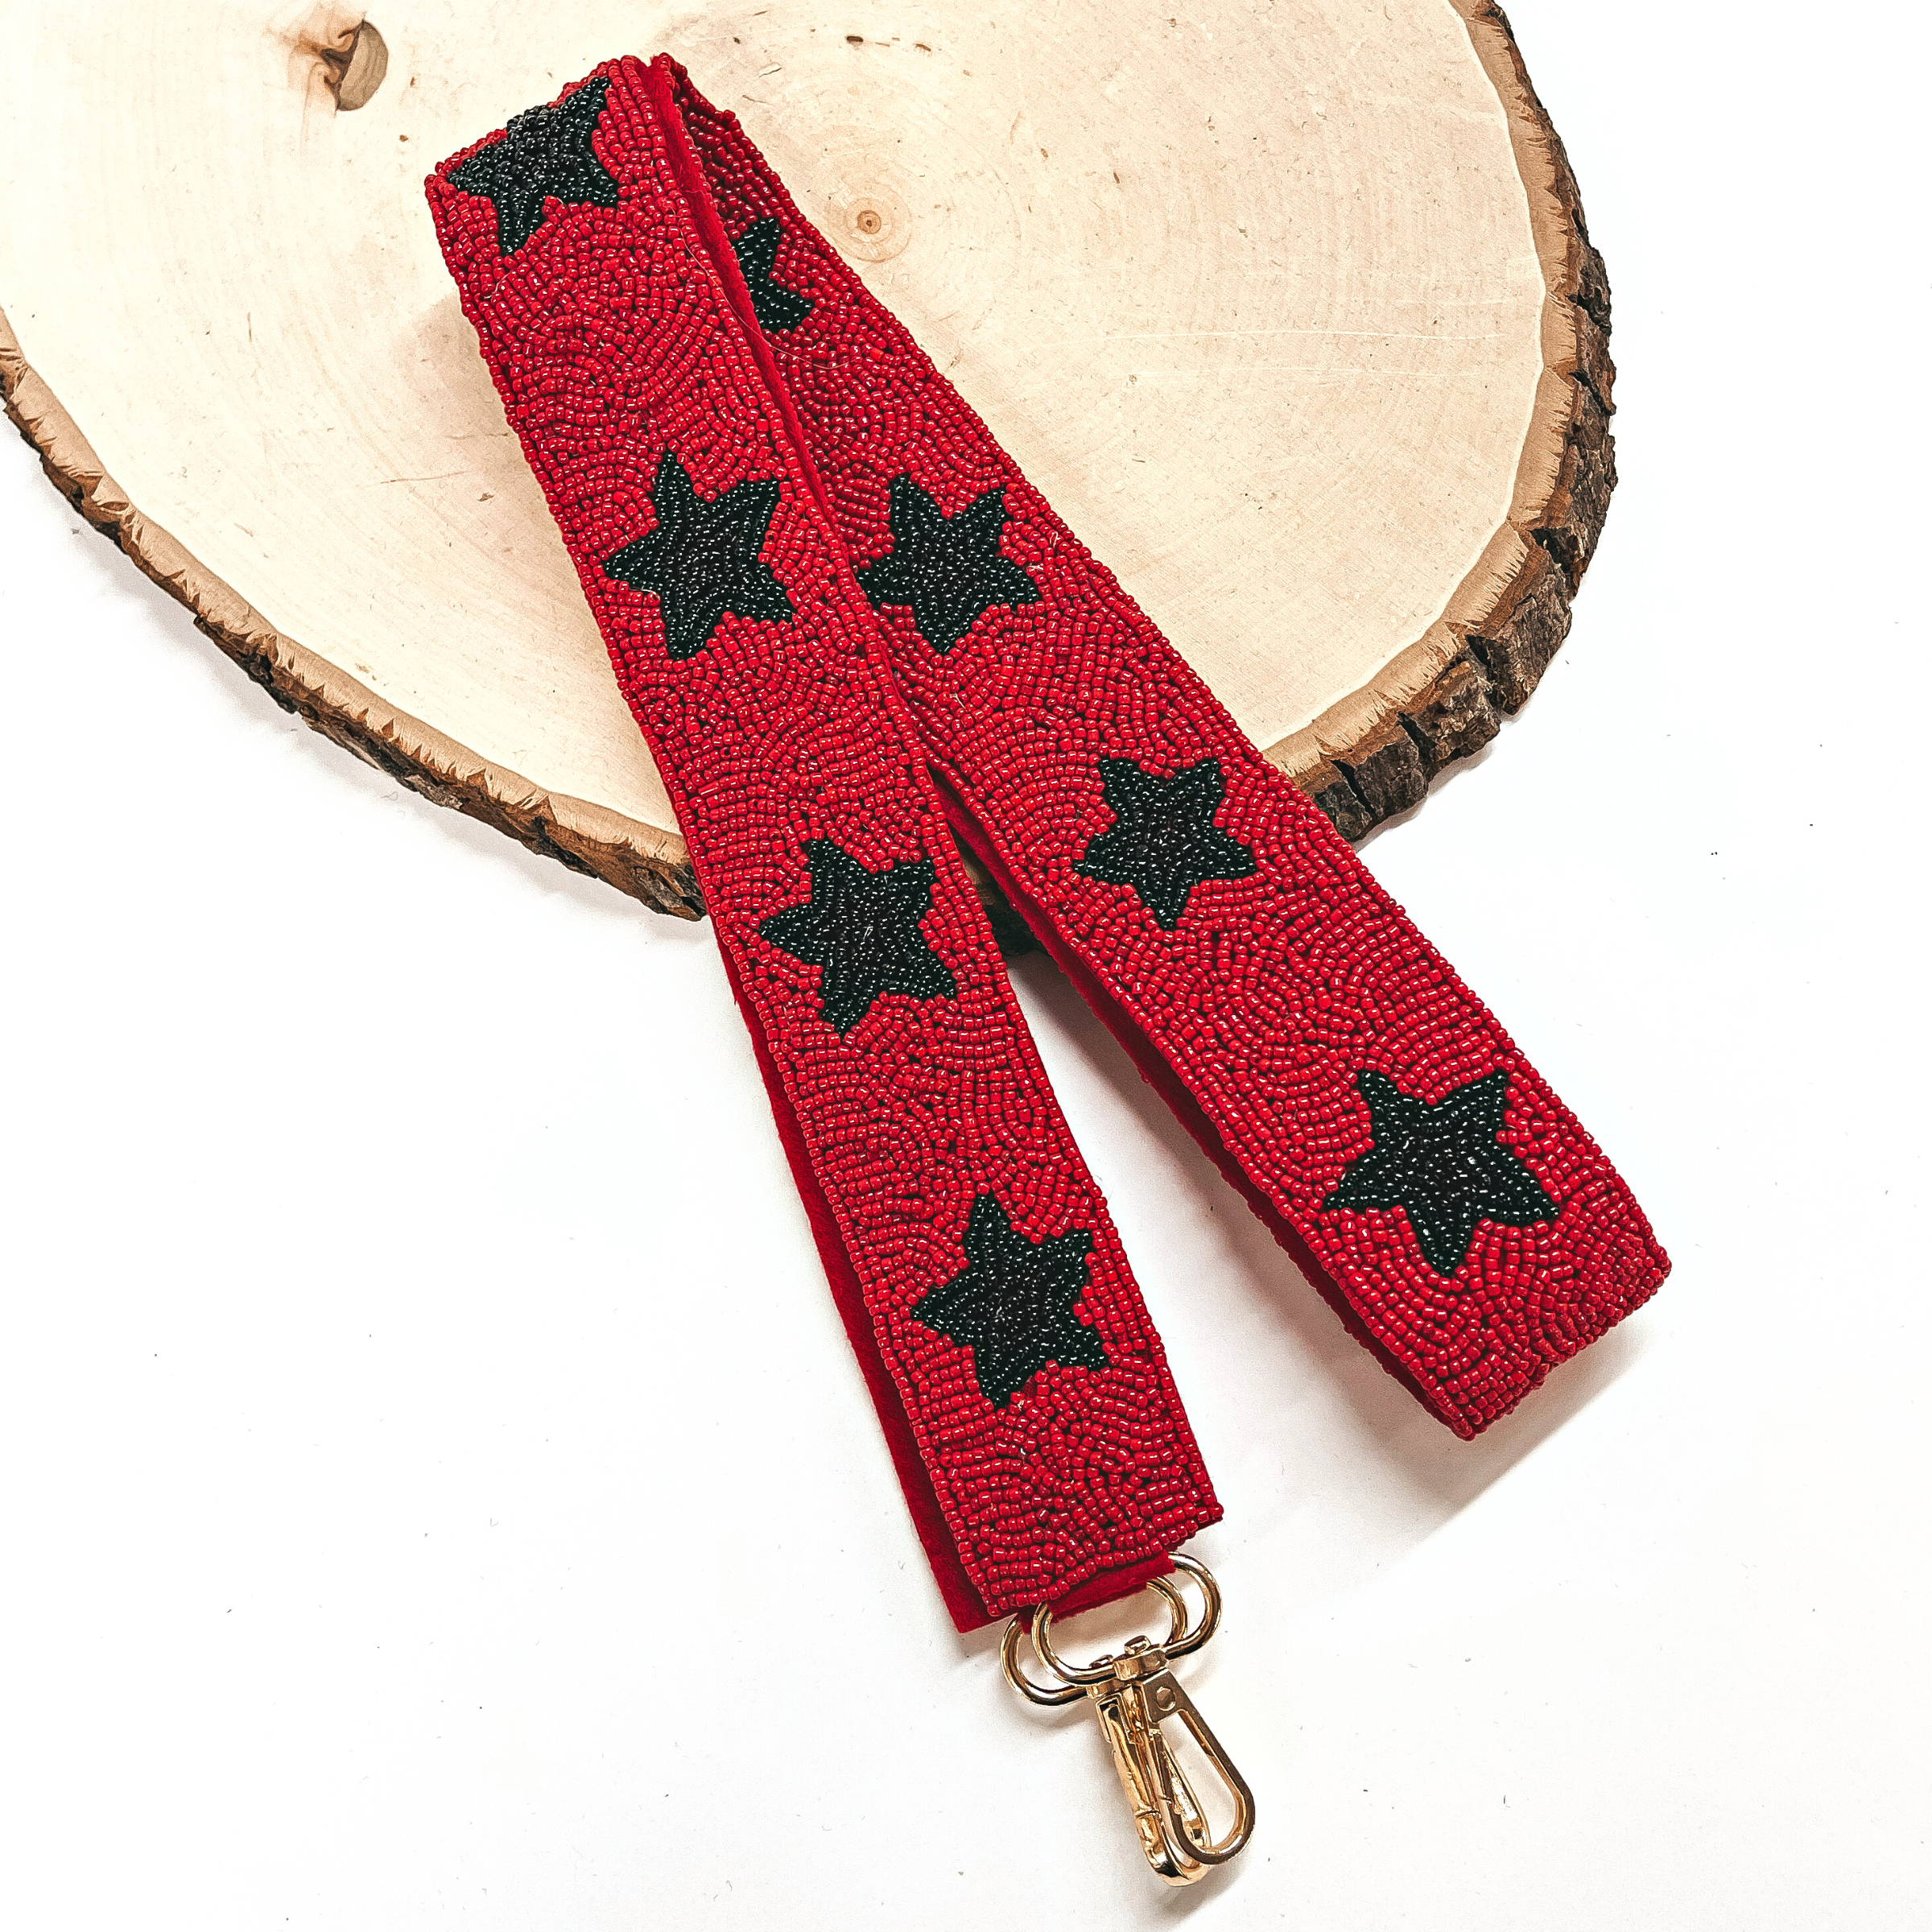 This is a red beaded purse straps with a black beaded stars all along with a gold clasp. This purse strap is taken on a slab of wood and on a white background.